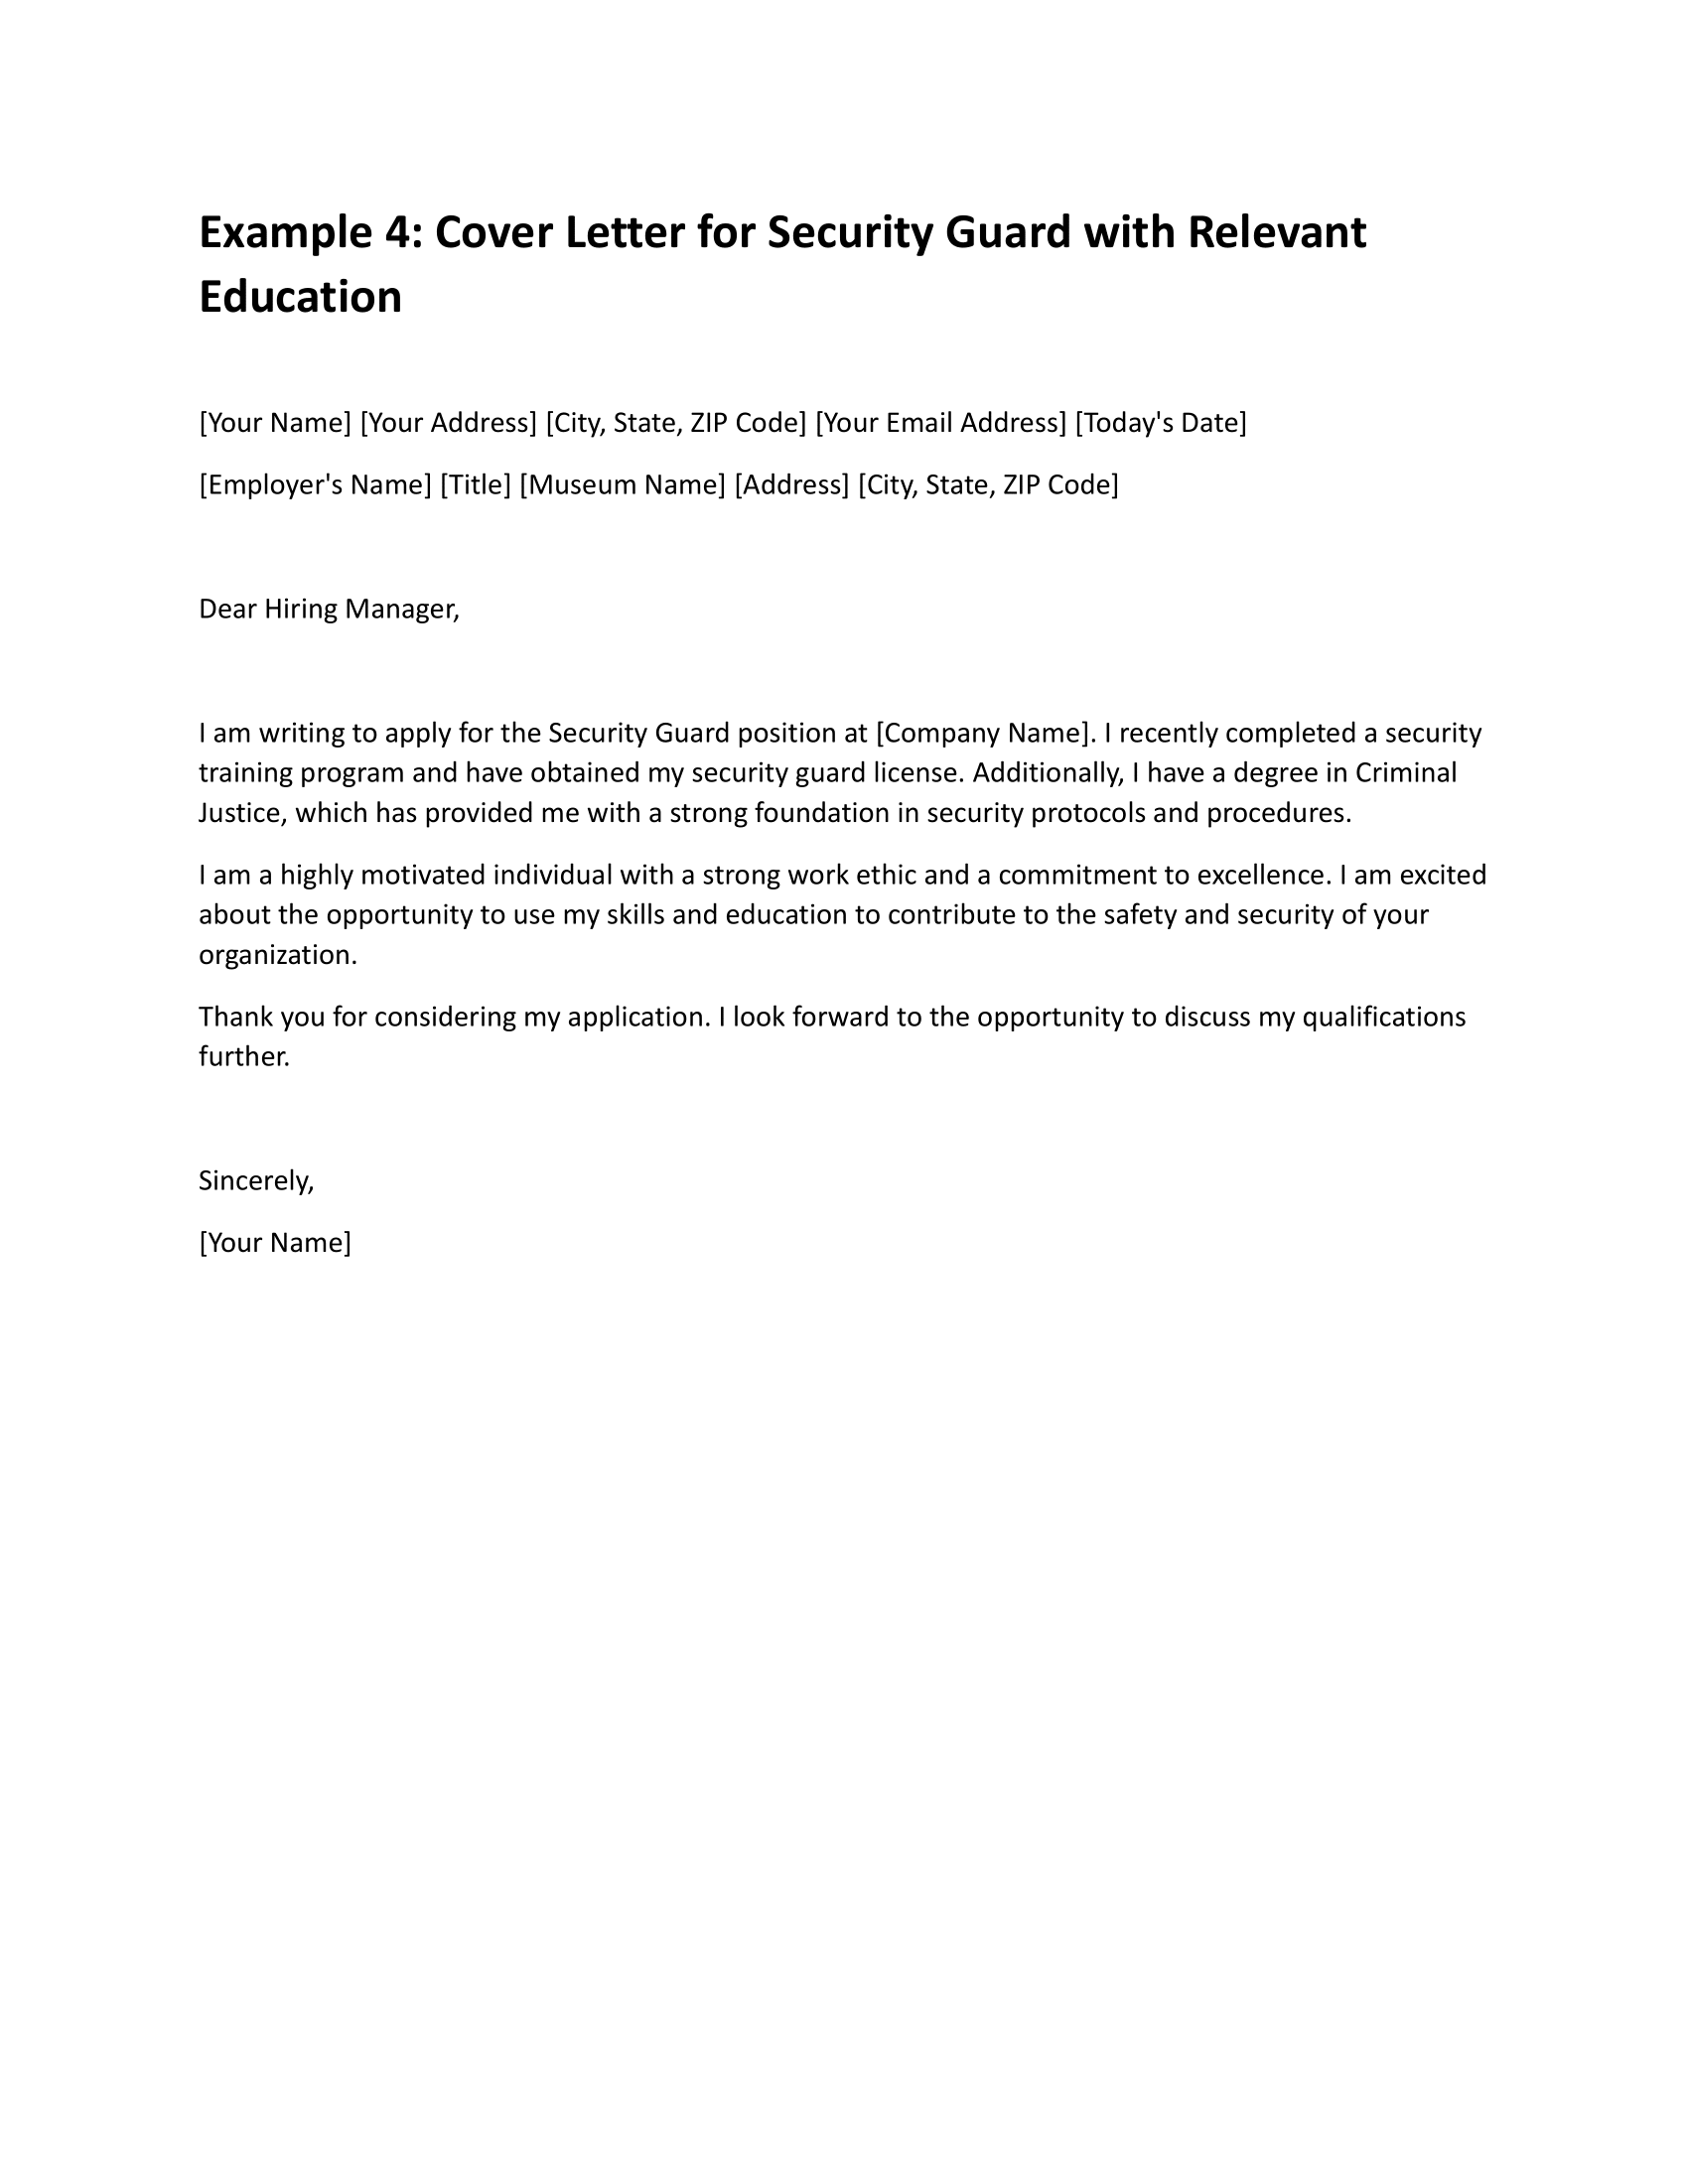 Cover Letter for Security Guard with Relevant Education